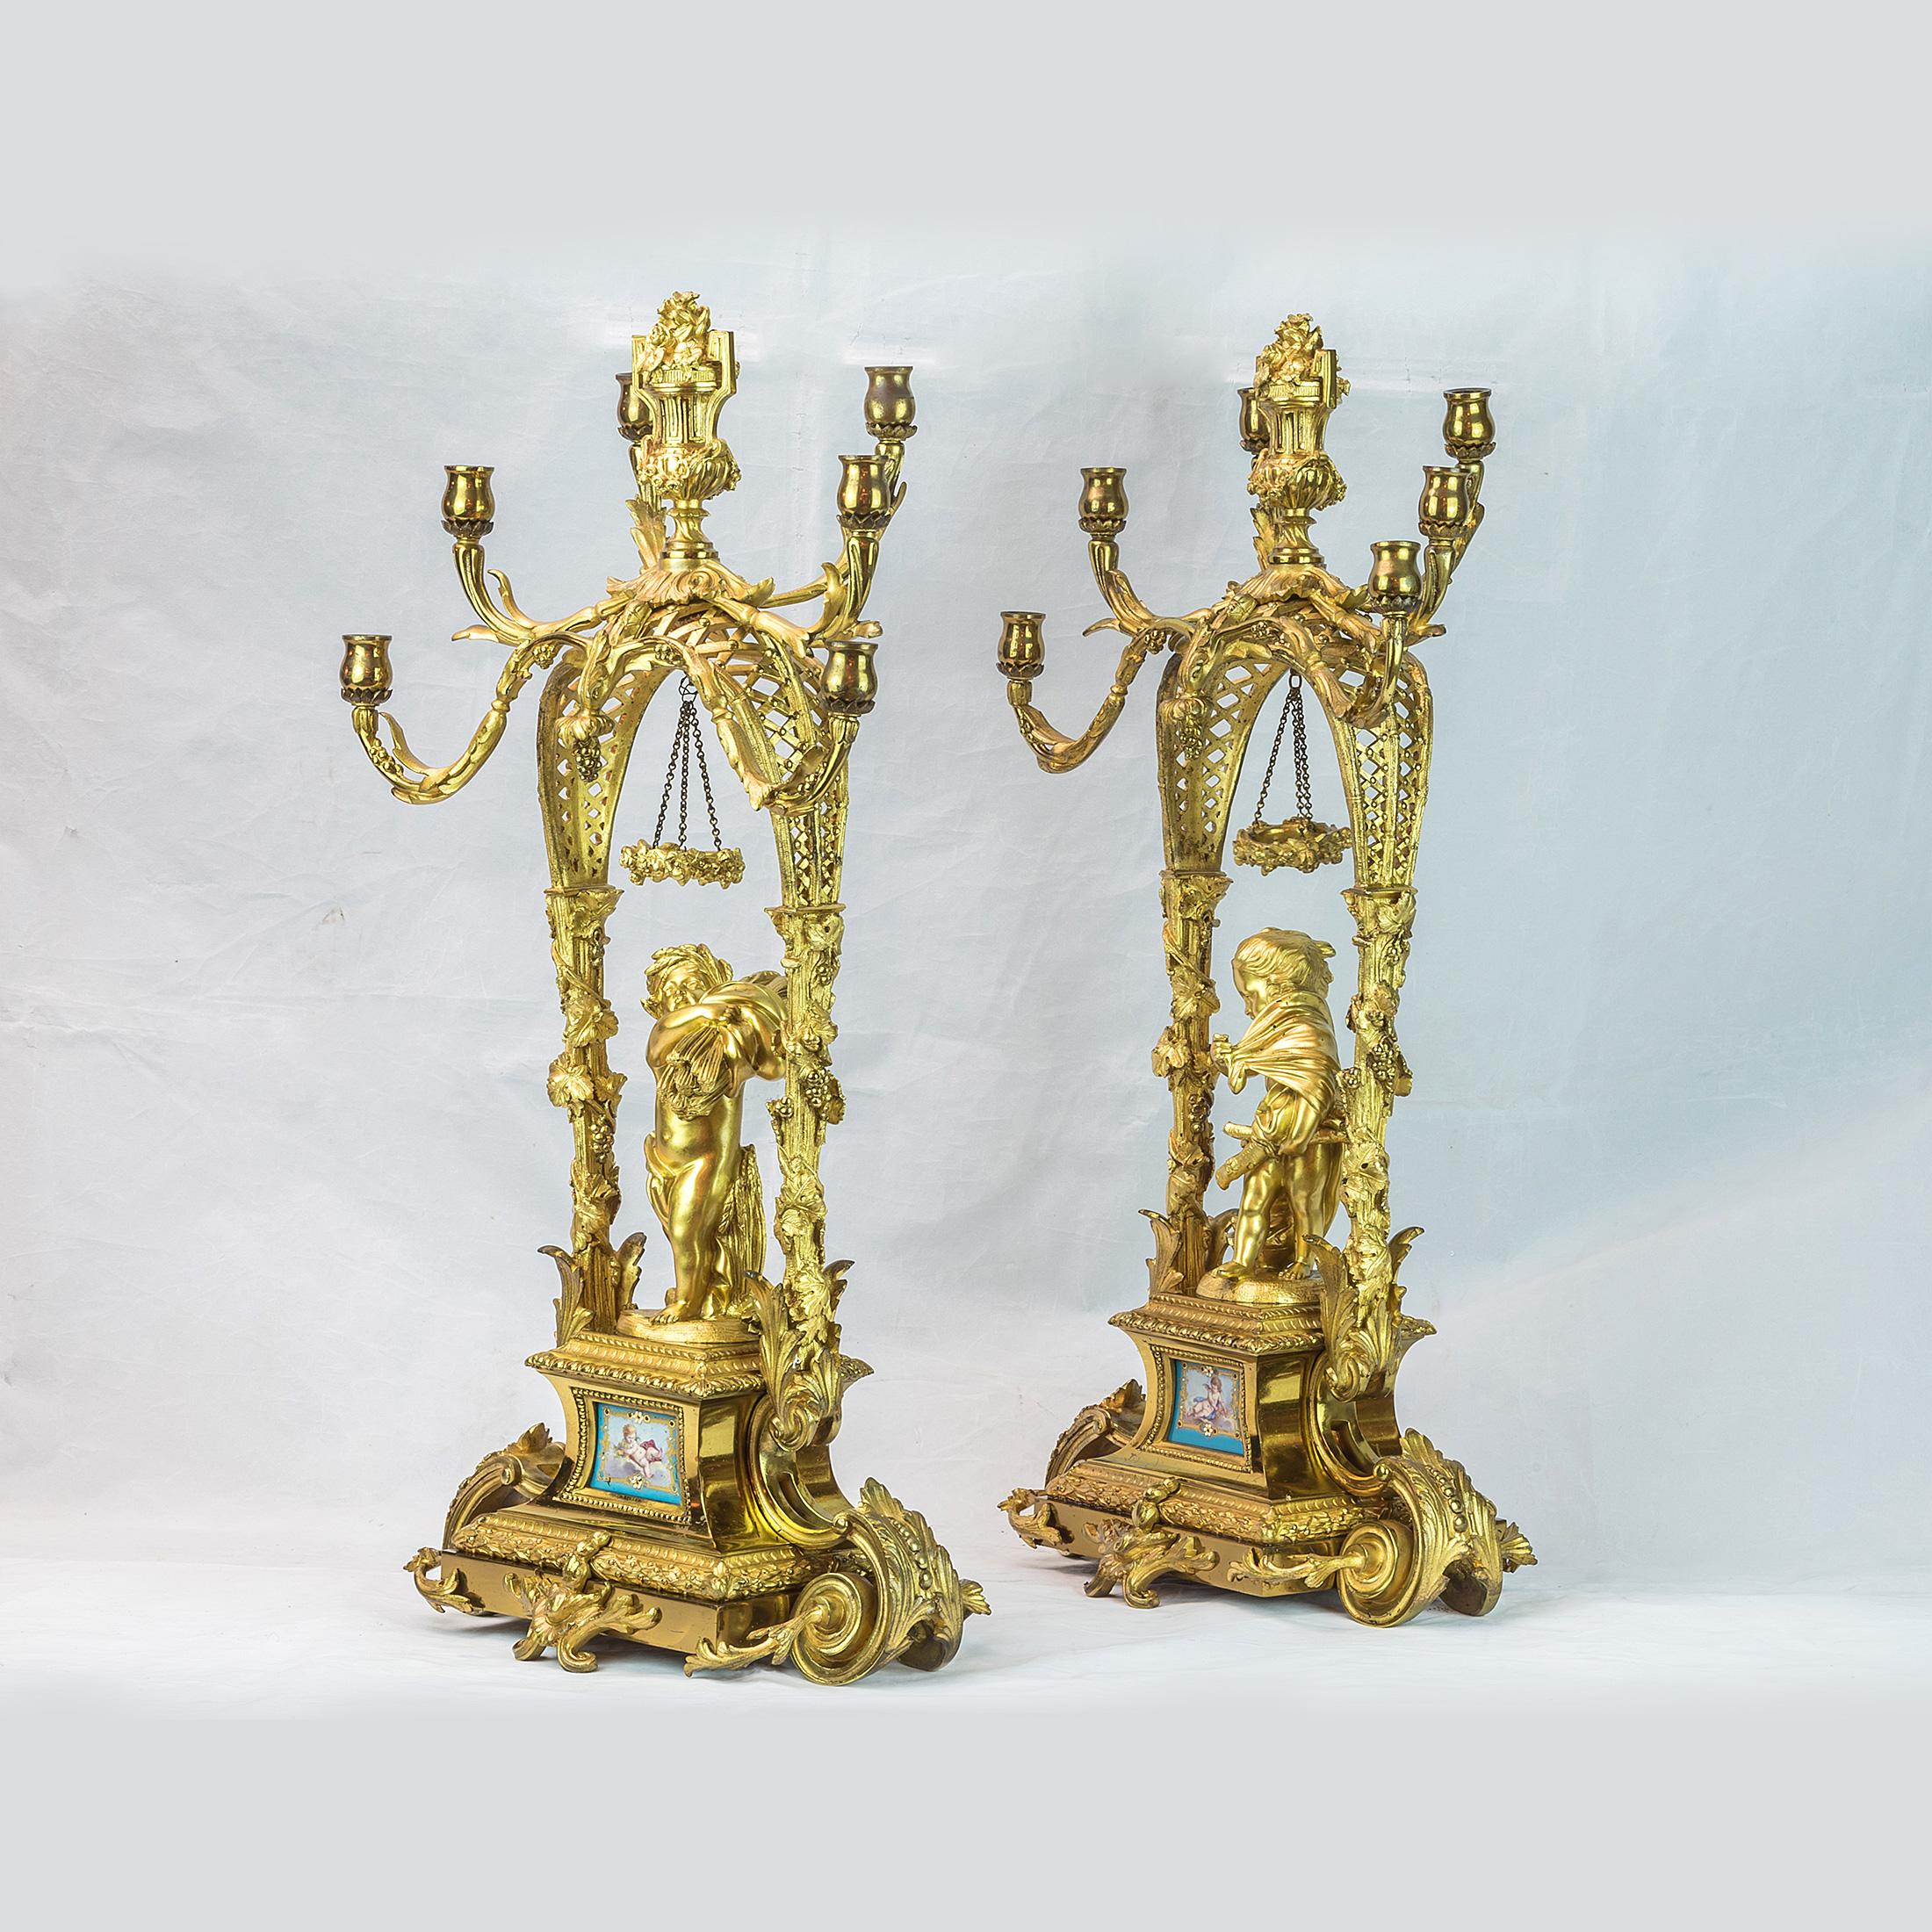 Fine pair of unusual six-light gilt bronze candelabras depicting a boy and a girl. The girl gathering wood; the boy carrying a bundle of wheat. 

Origin: French
Date: circa 1880
Dimension: 22.5 in. x 11.75 in. x 6.75 in.